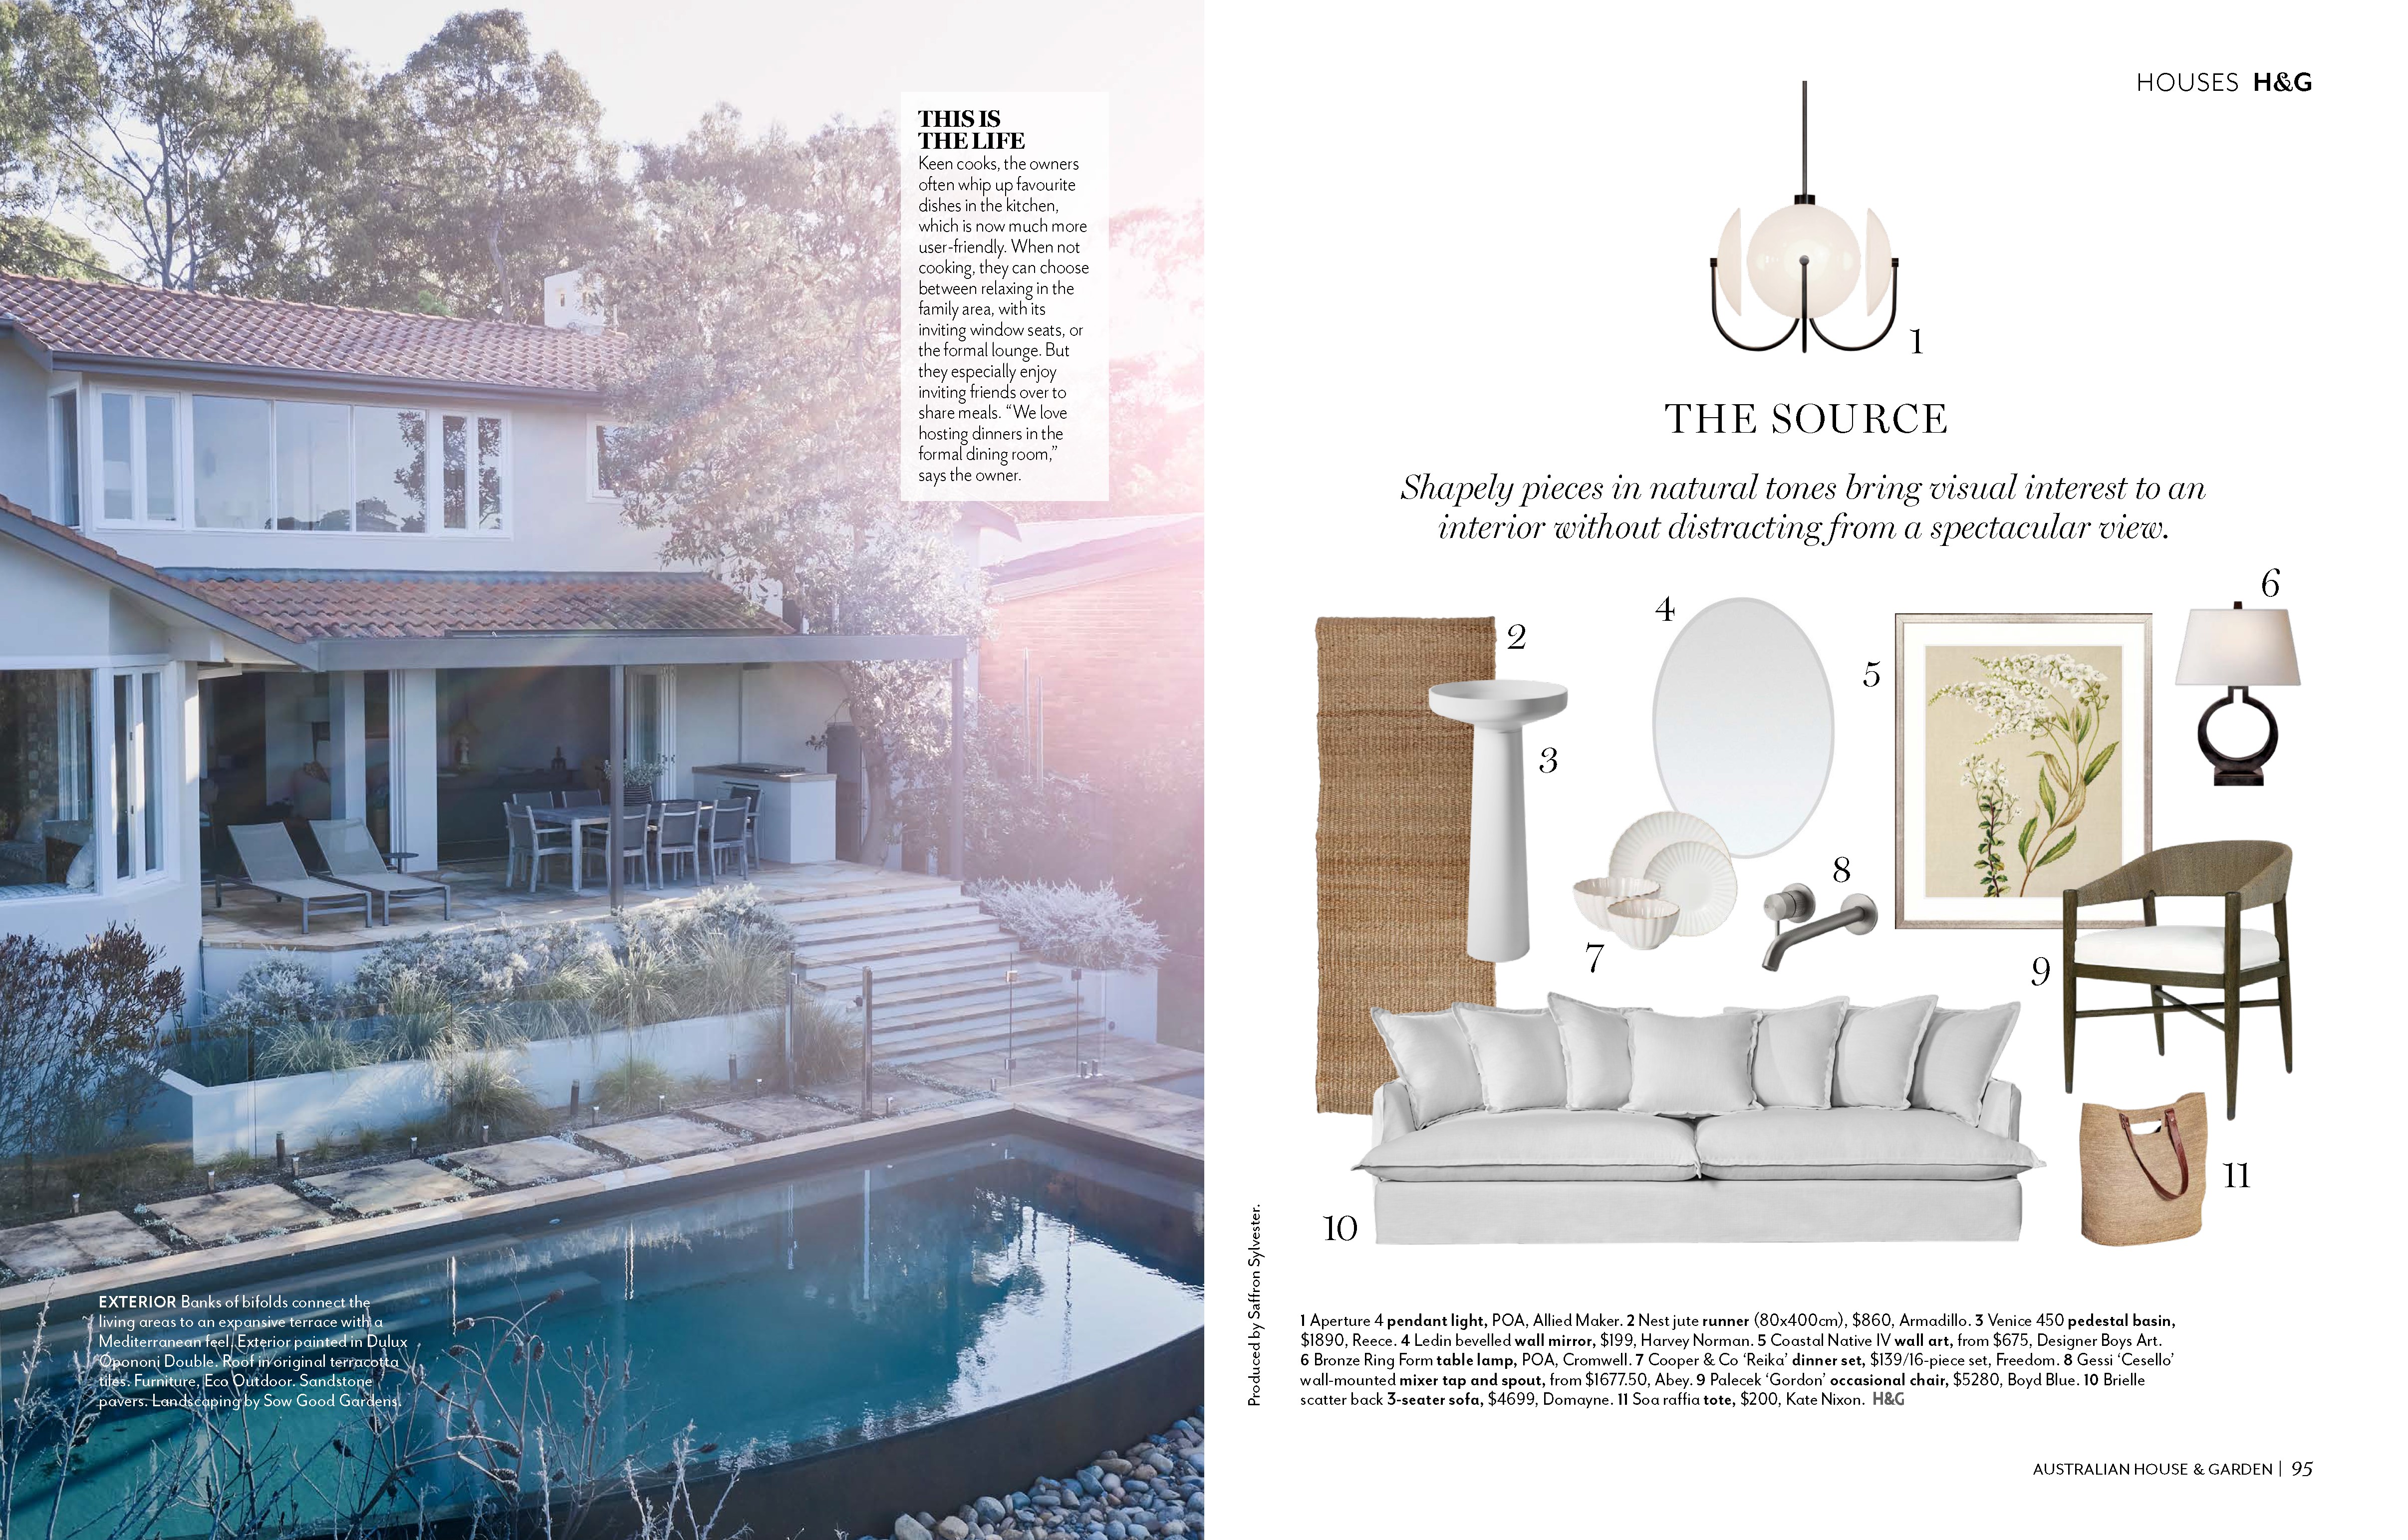 Kate Nixon's Sugarloaf project featured in House and Garden Magazine - Page 11-12